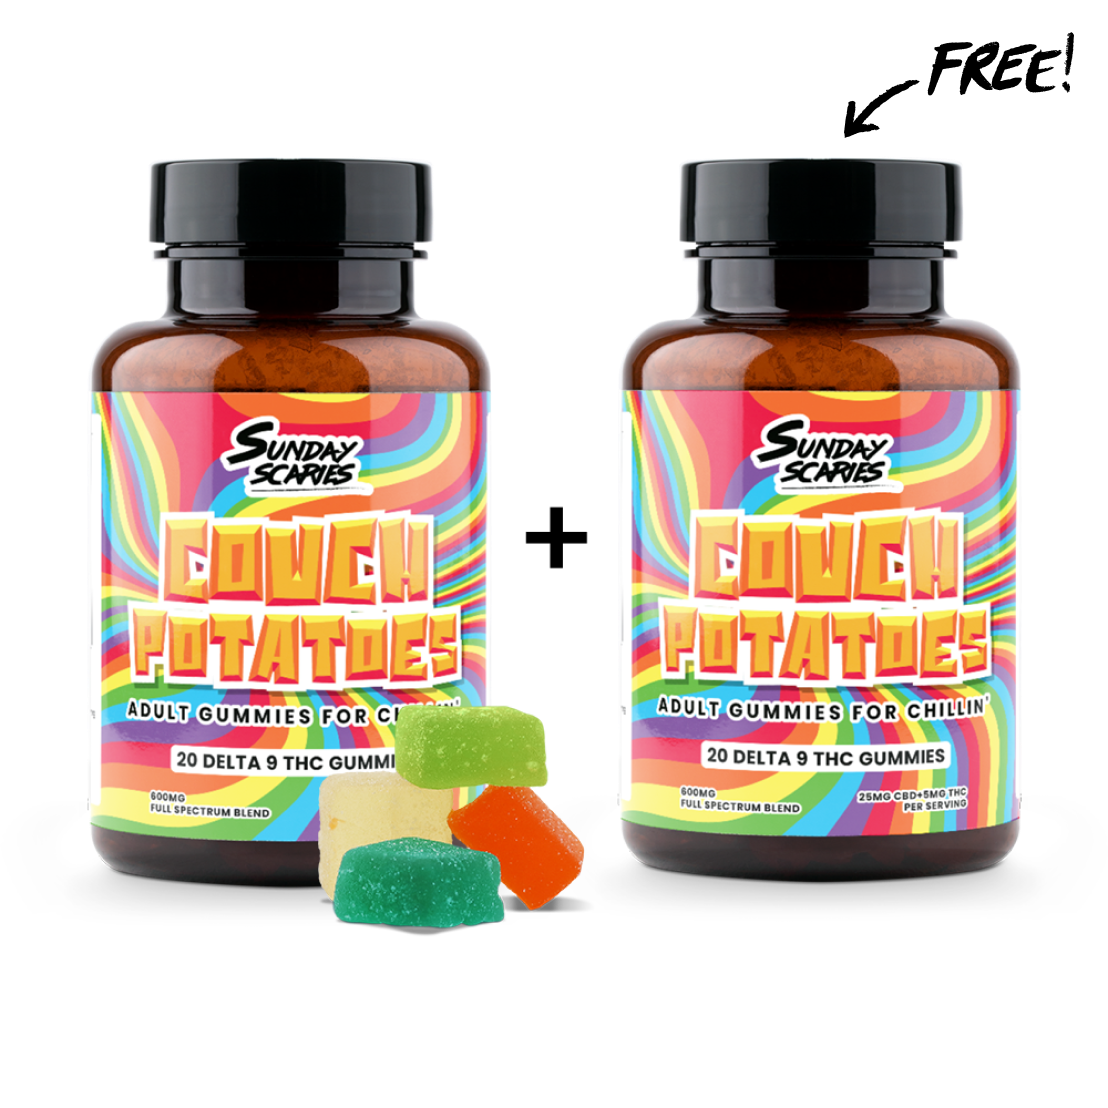 BOGO Offer: Couch Potatoes Gummies